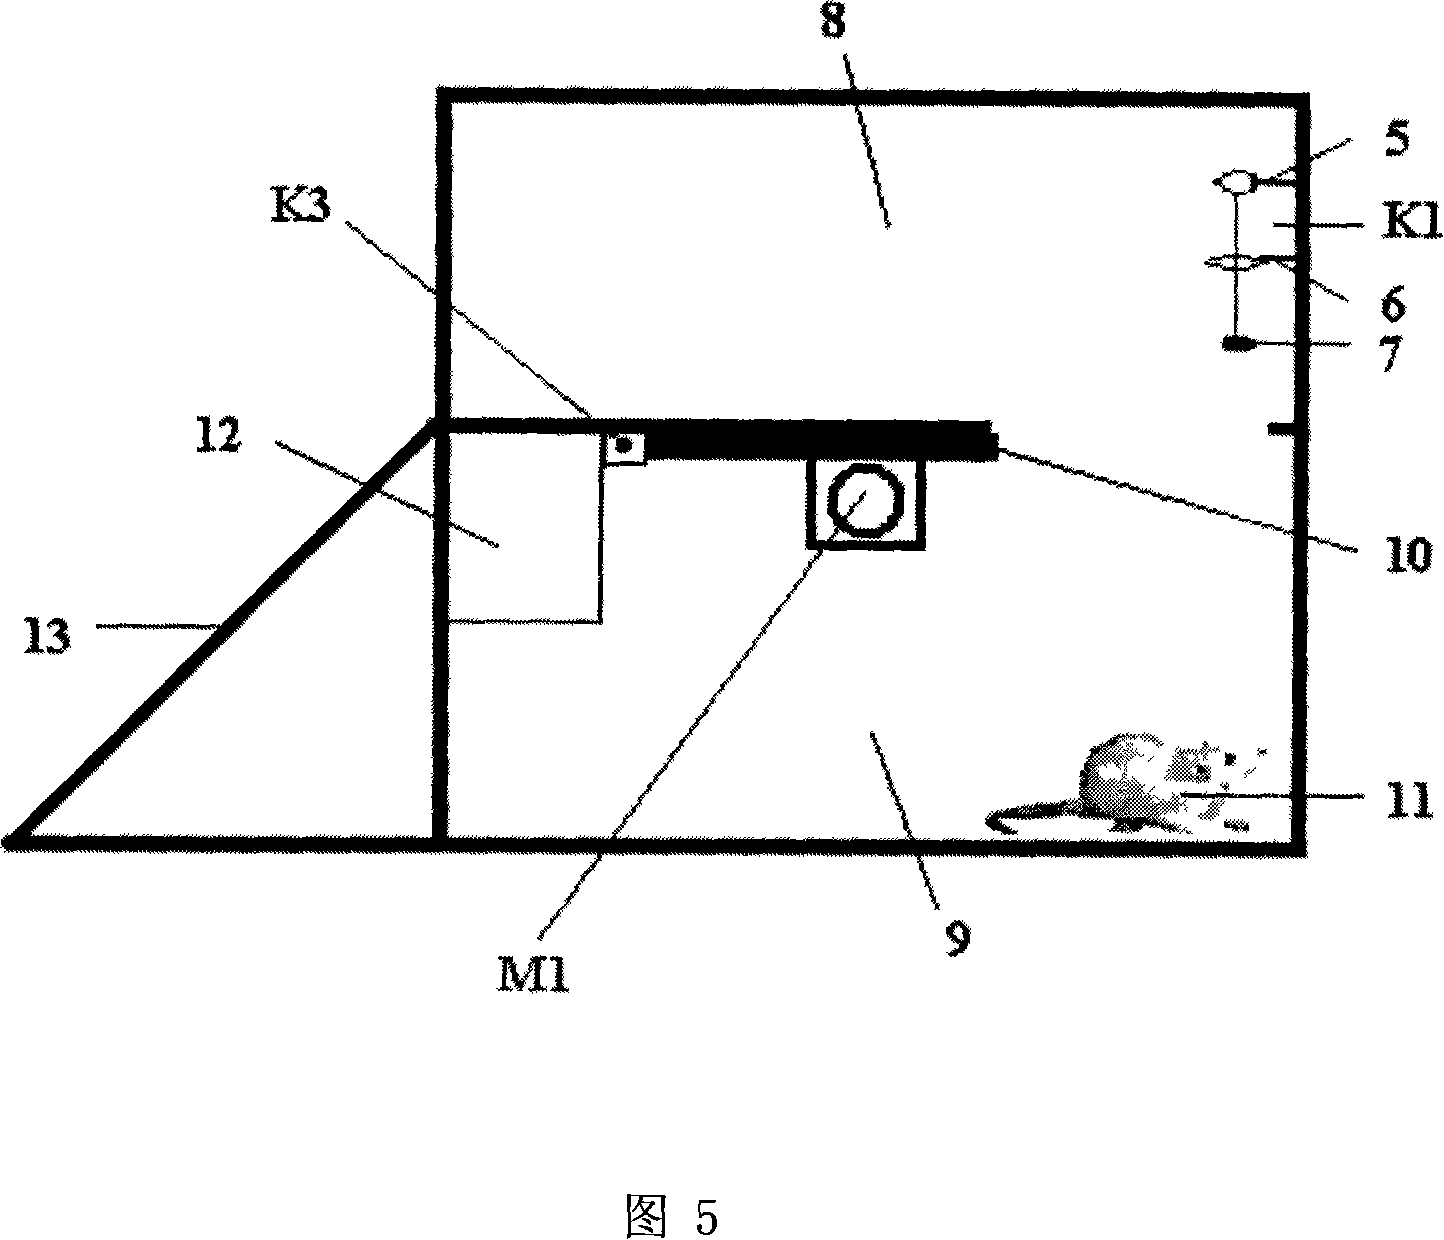 Controllable silicon trigger circuit of continuous mouse trapping boxes